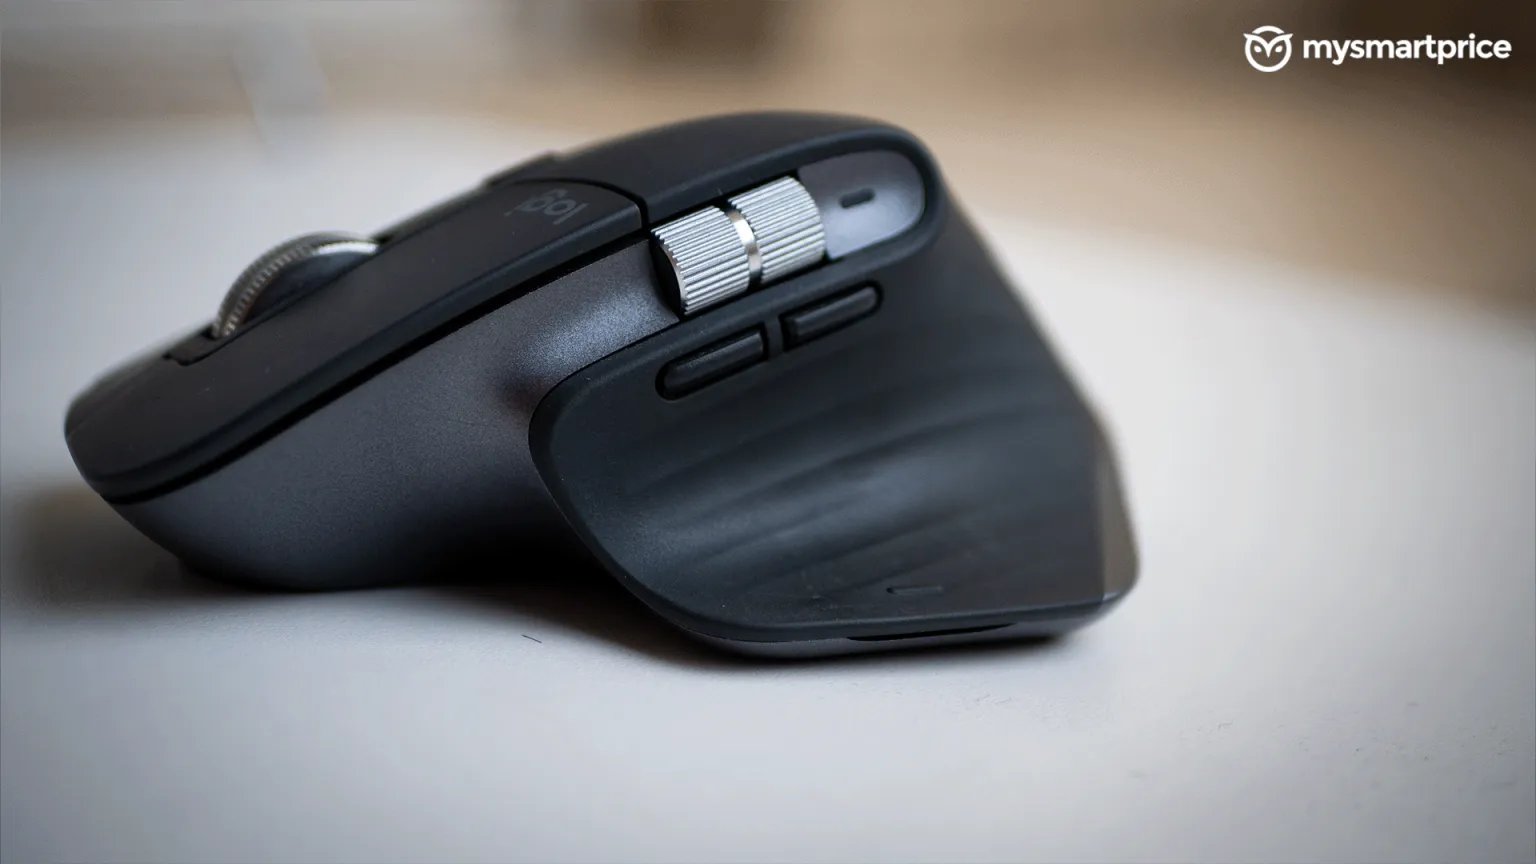 mysmartprice on Twitter: "Logitech MX Master 3S review: ✓ Ergonomically built ✓ Crazy battery life 'Flow' works flawlessly ❌ Awkward gesture At Rs 8,995, it has quieter clicks, long battery